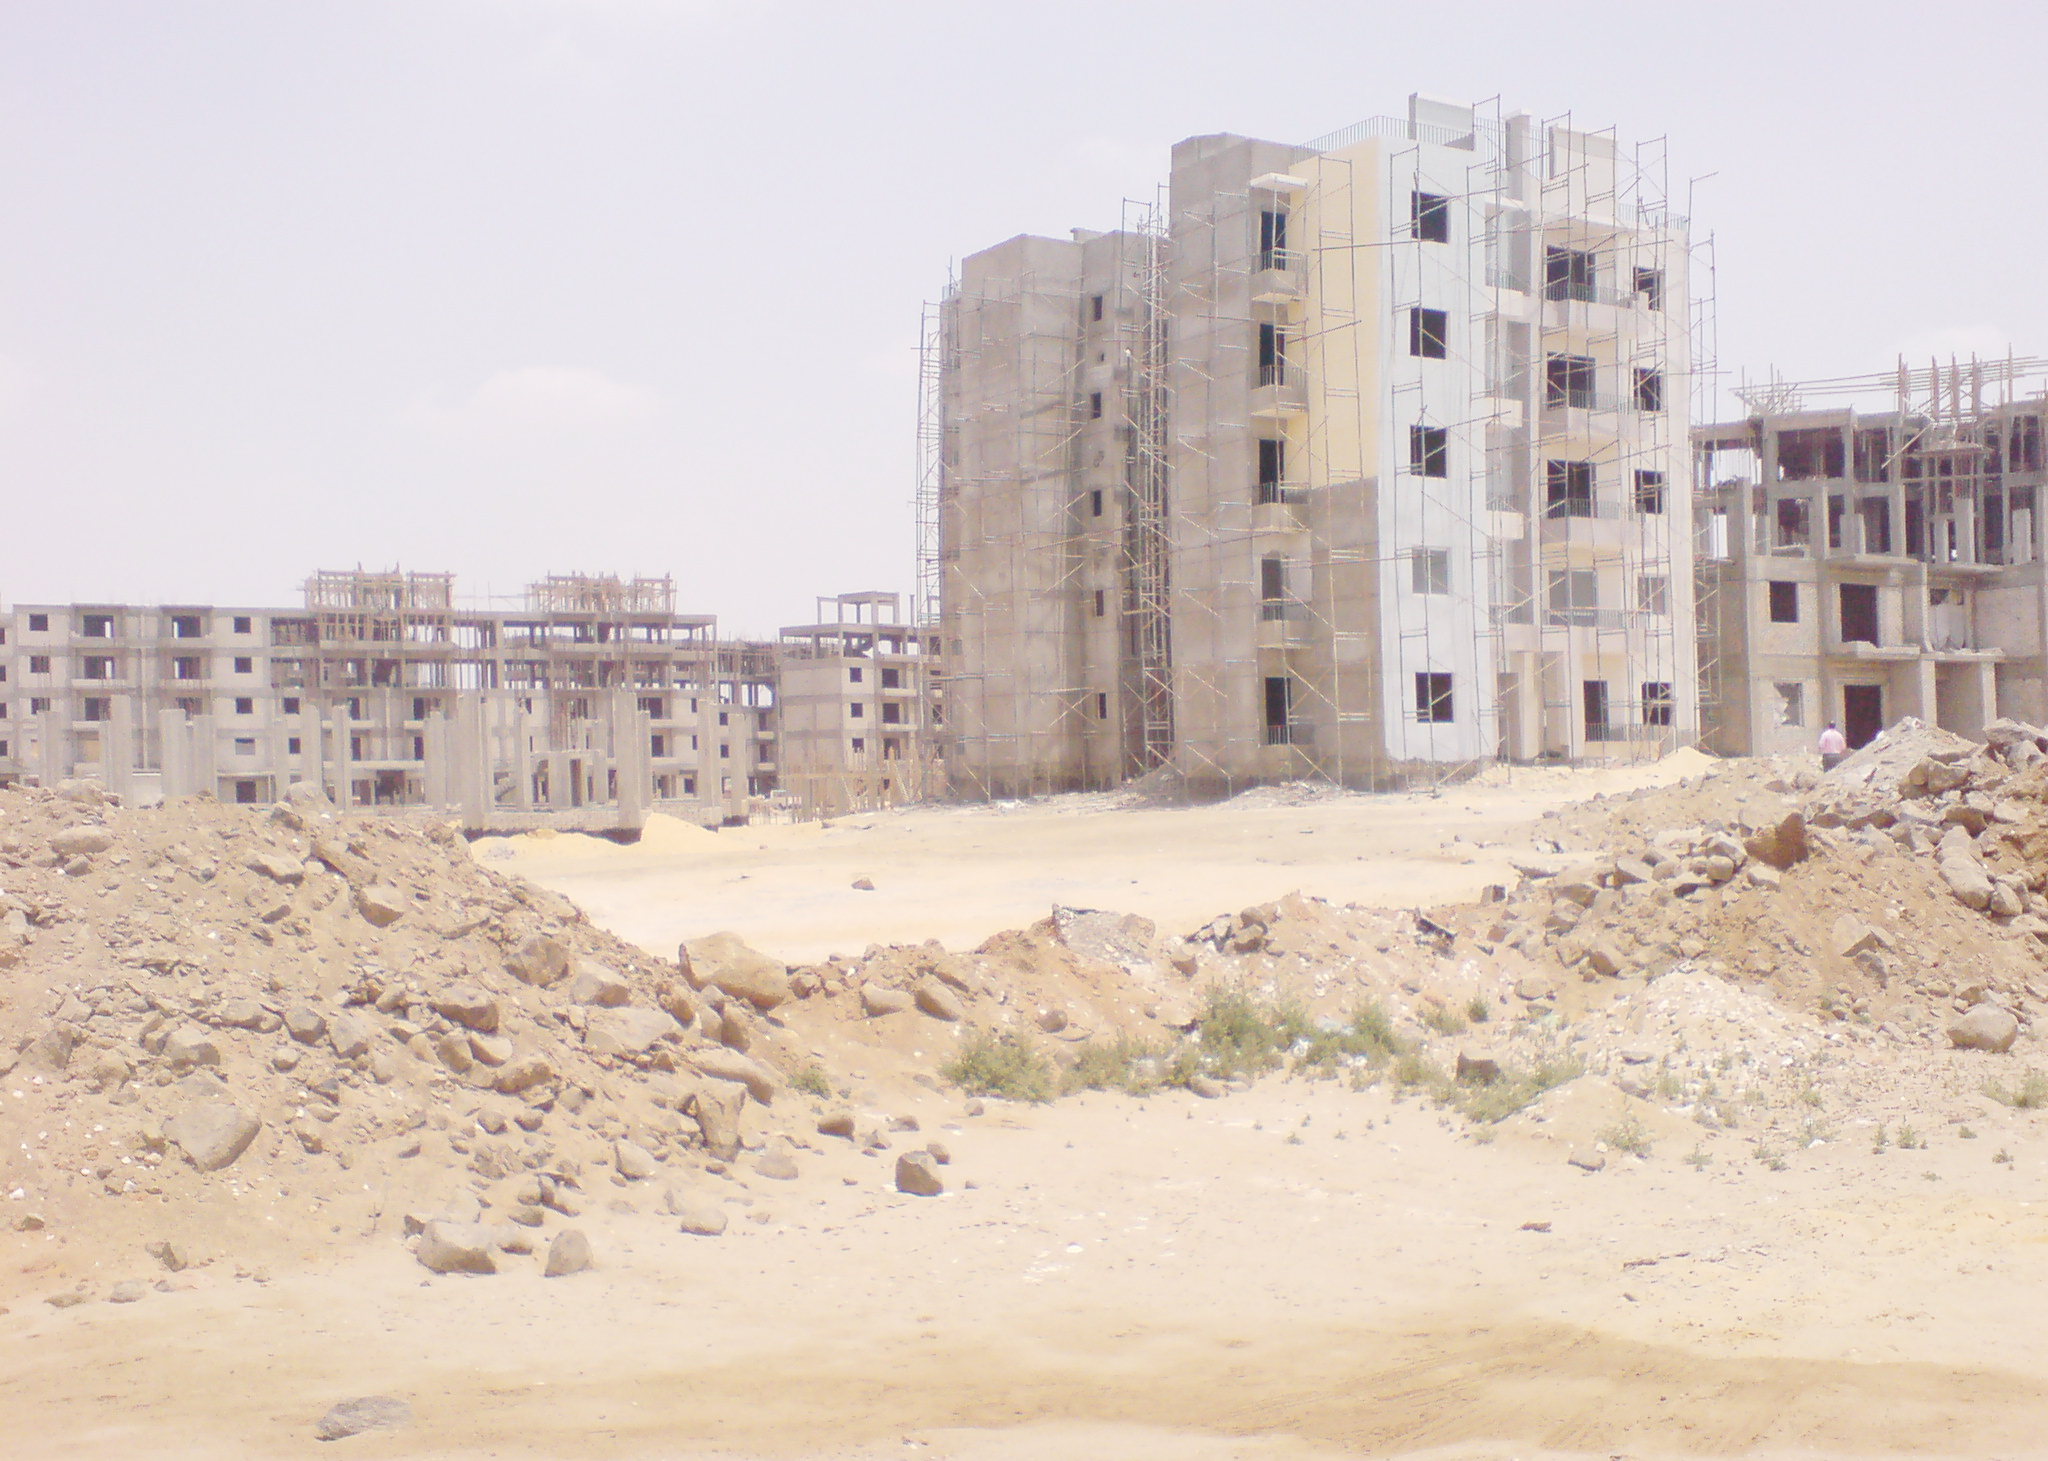 The Ministry of Housing froze all standing housing projects, including the second phase of a plan to build one million units and another Central Agency for Construction plan for 50,000 units in the provinces